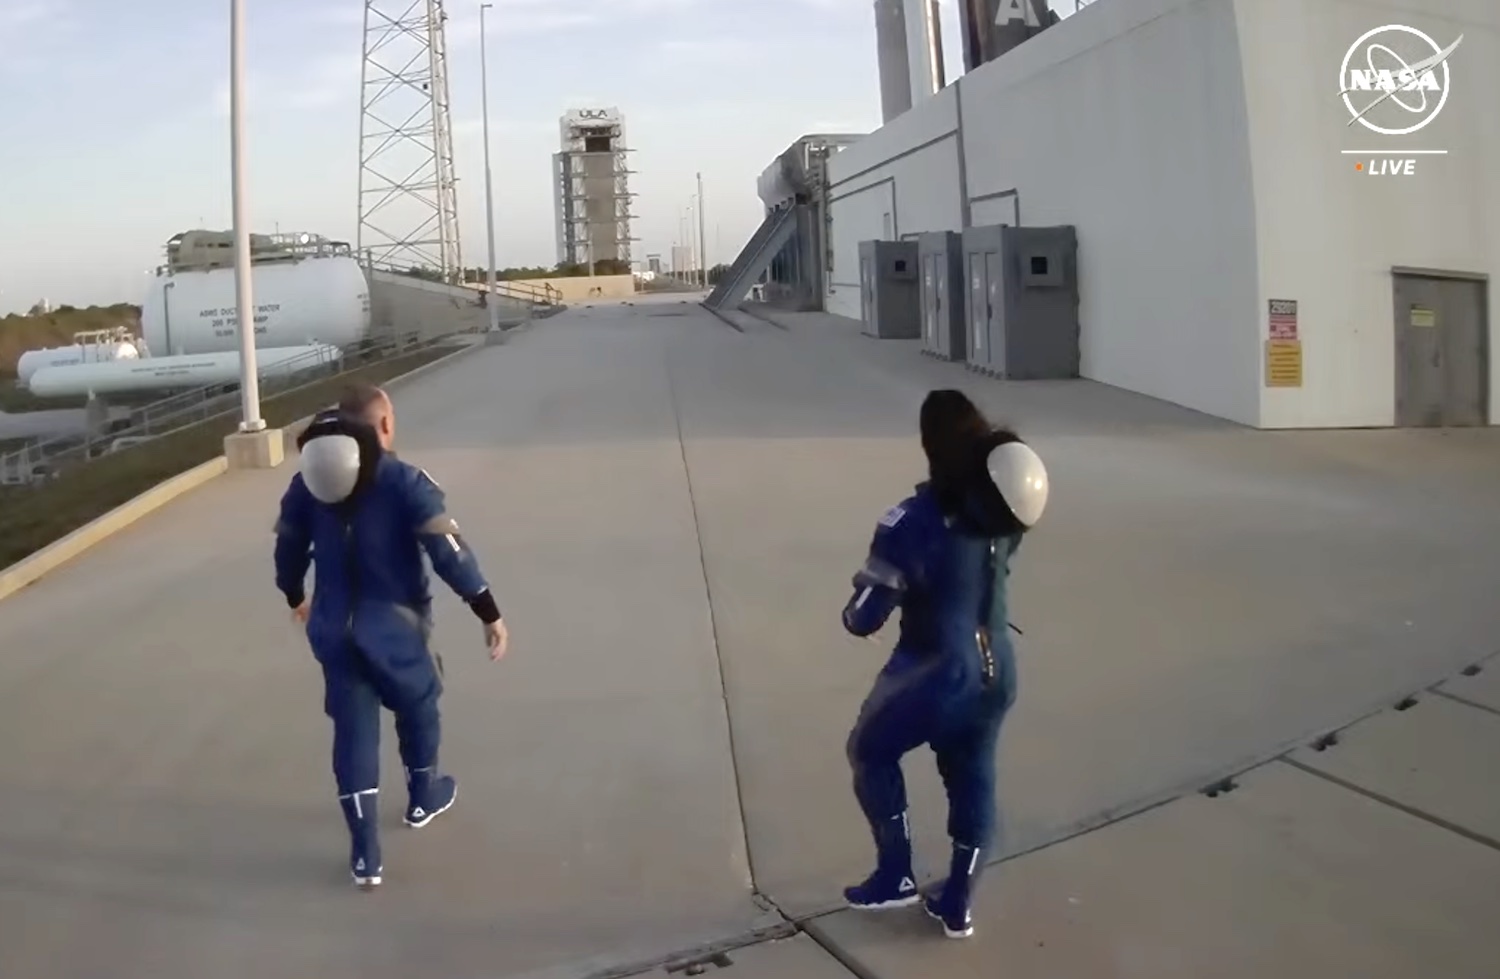 The Starliner astronauts arrive at the launchpad for the spacecraft's first crewed flight.